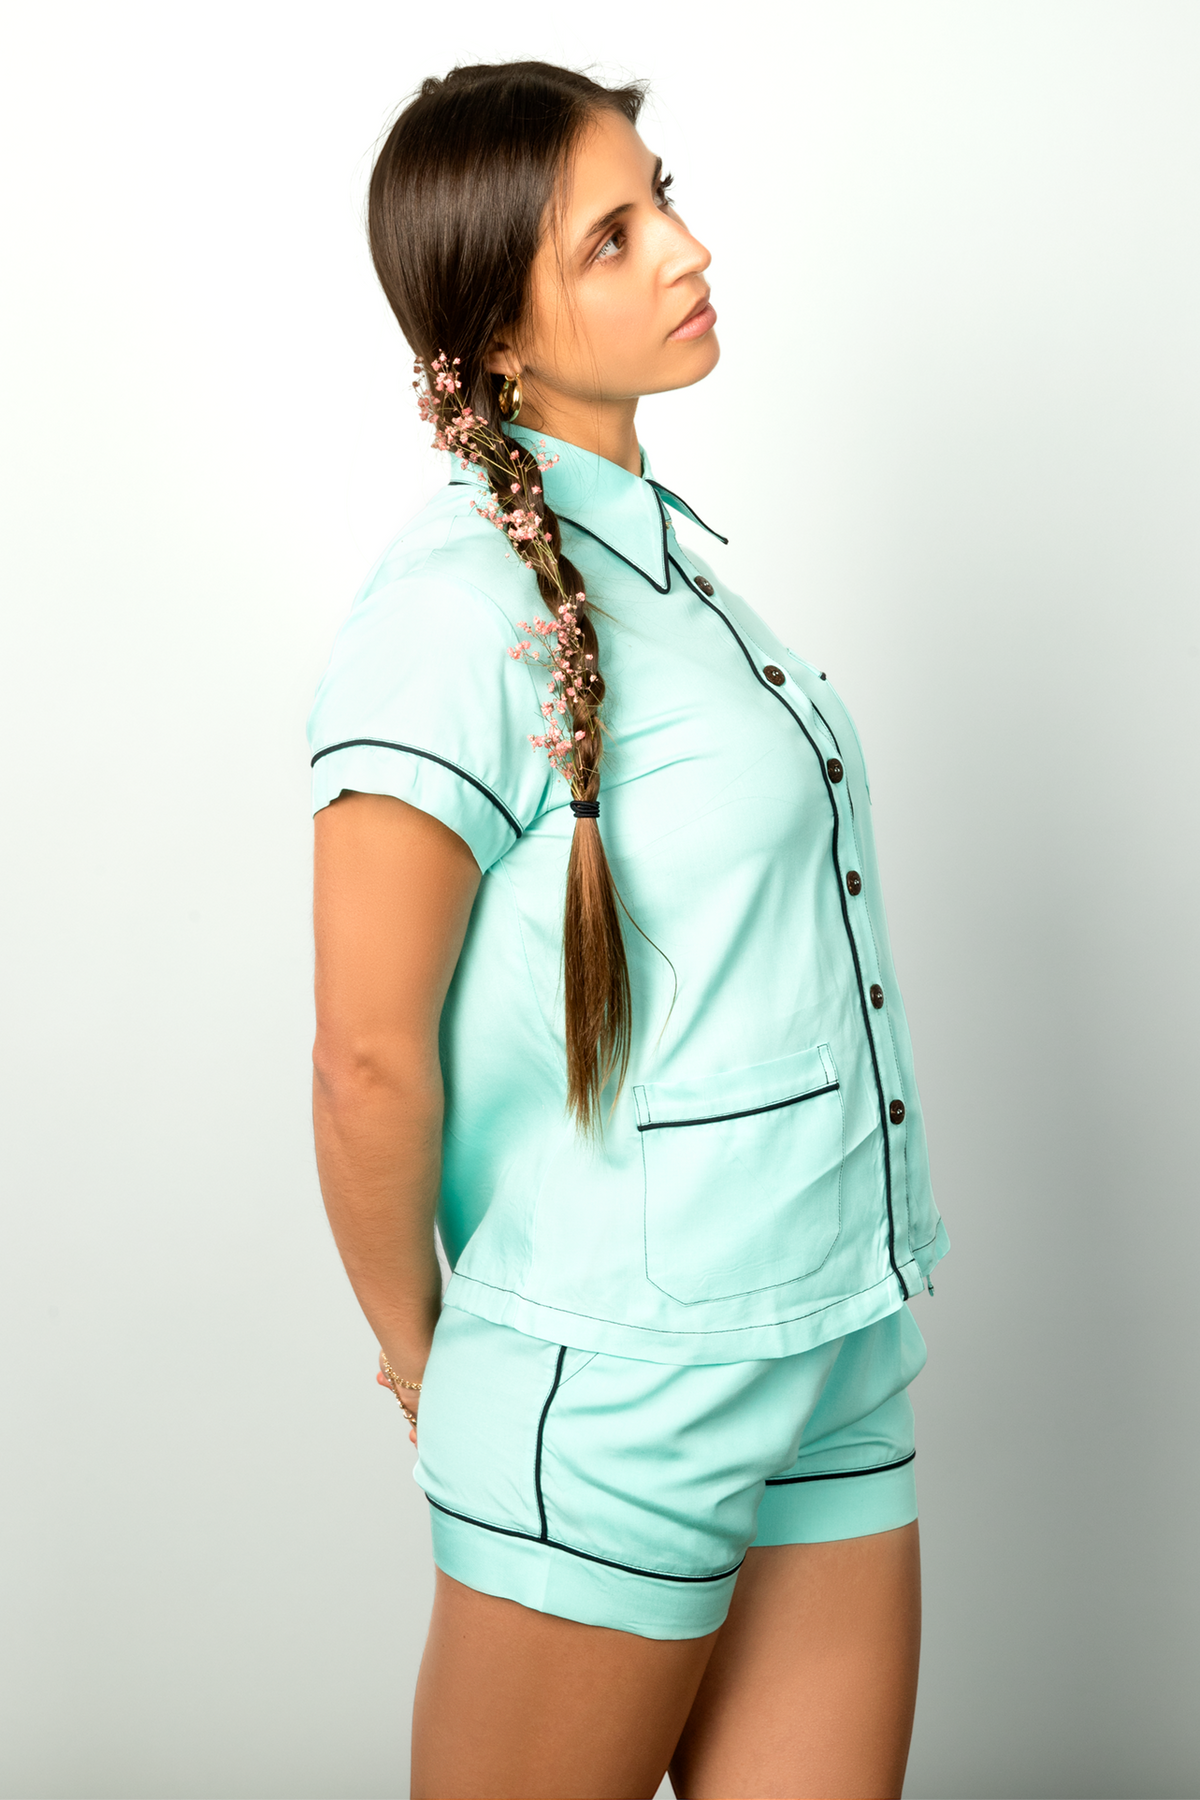 Woman with flowers in her braided hair wears a teal short-sleeve button-down.